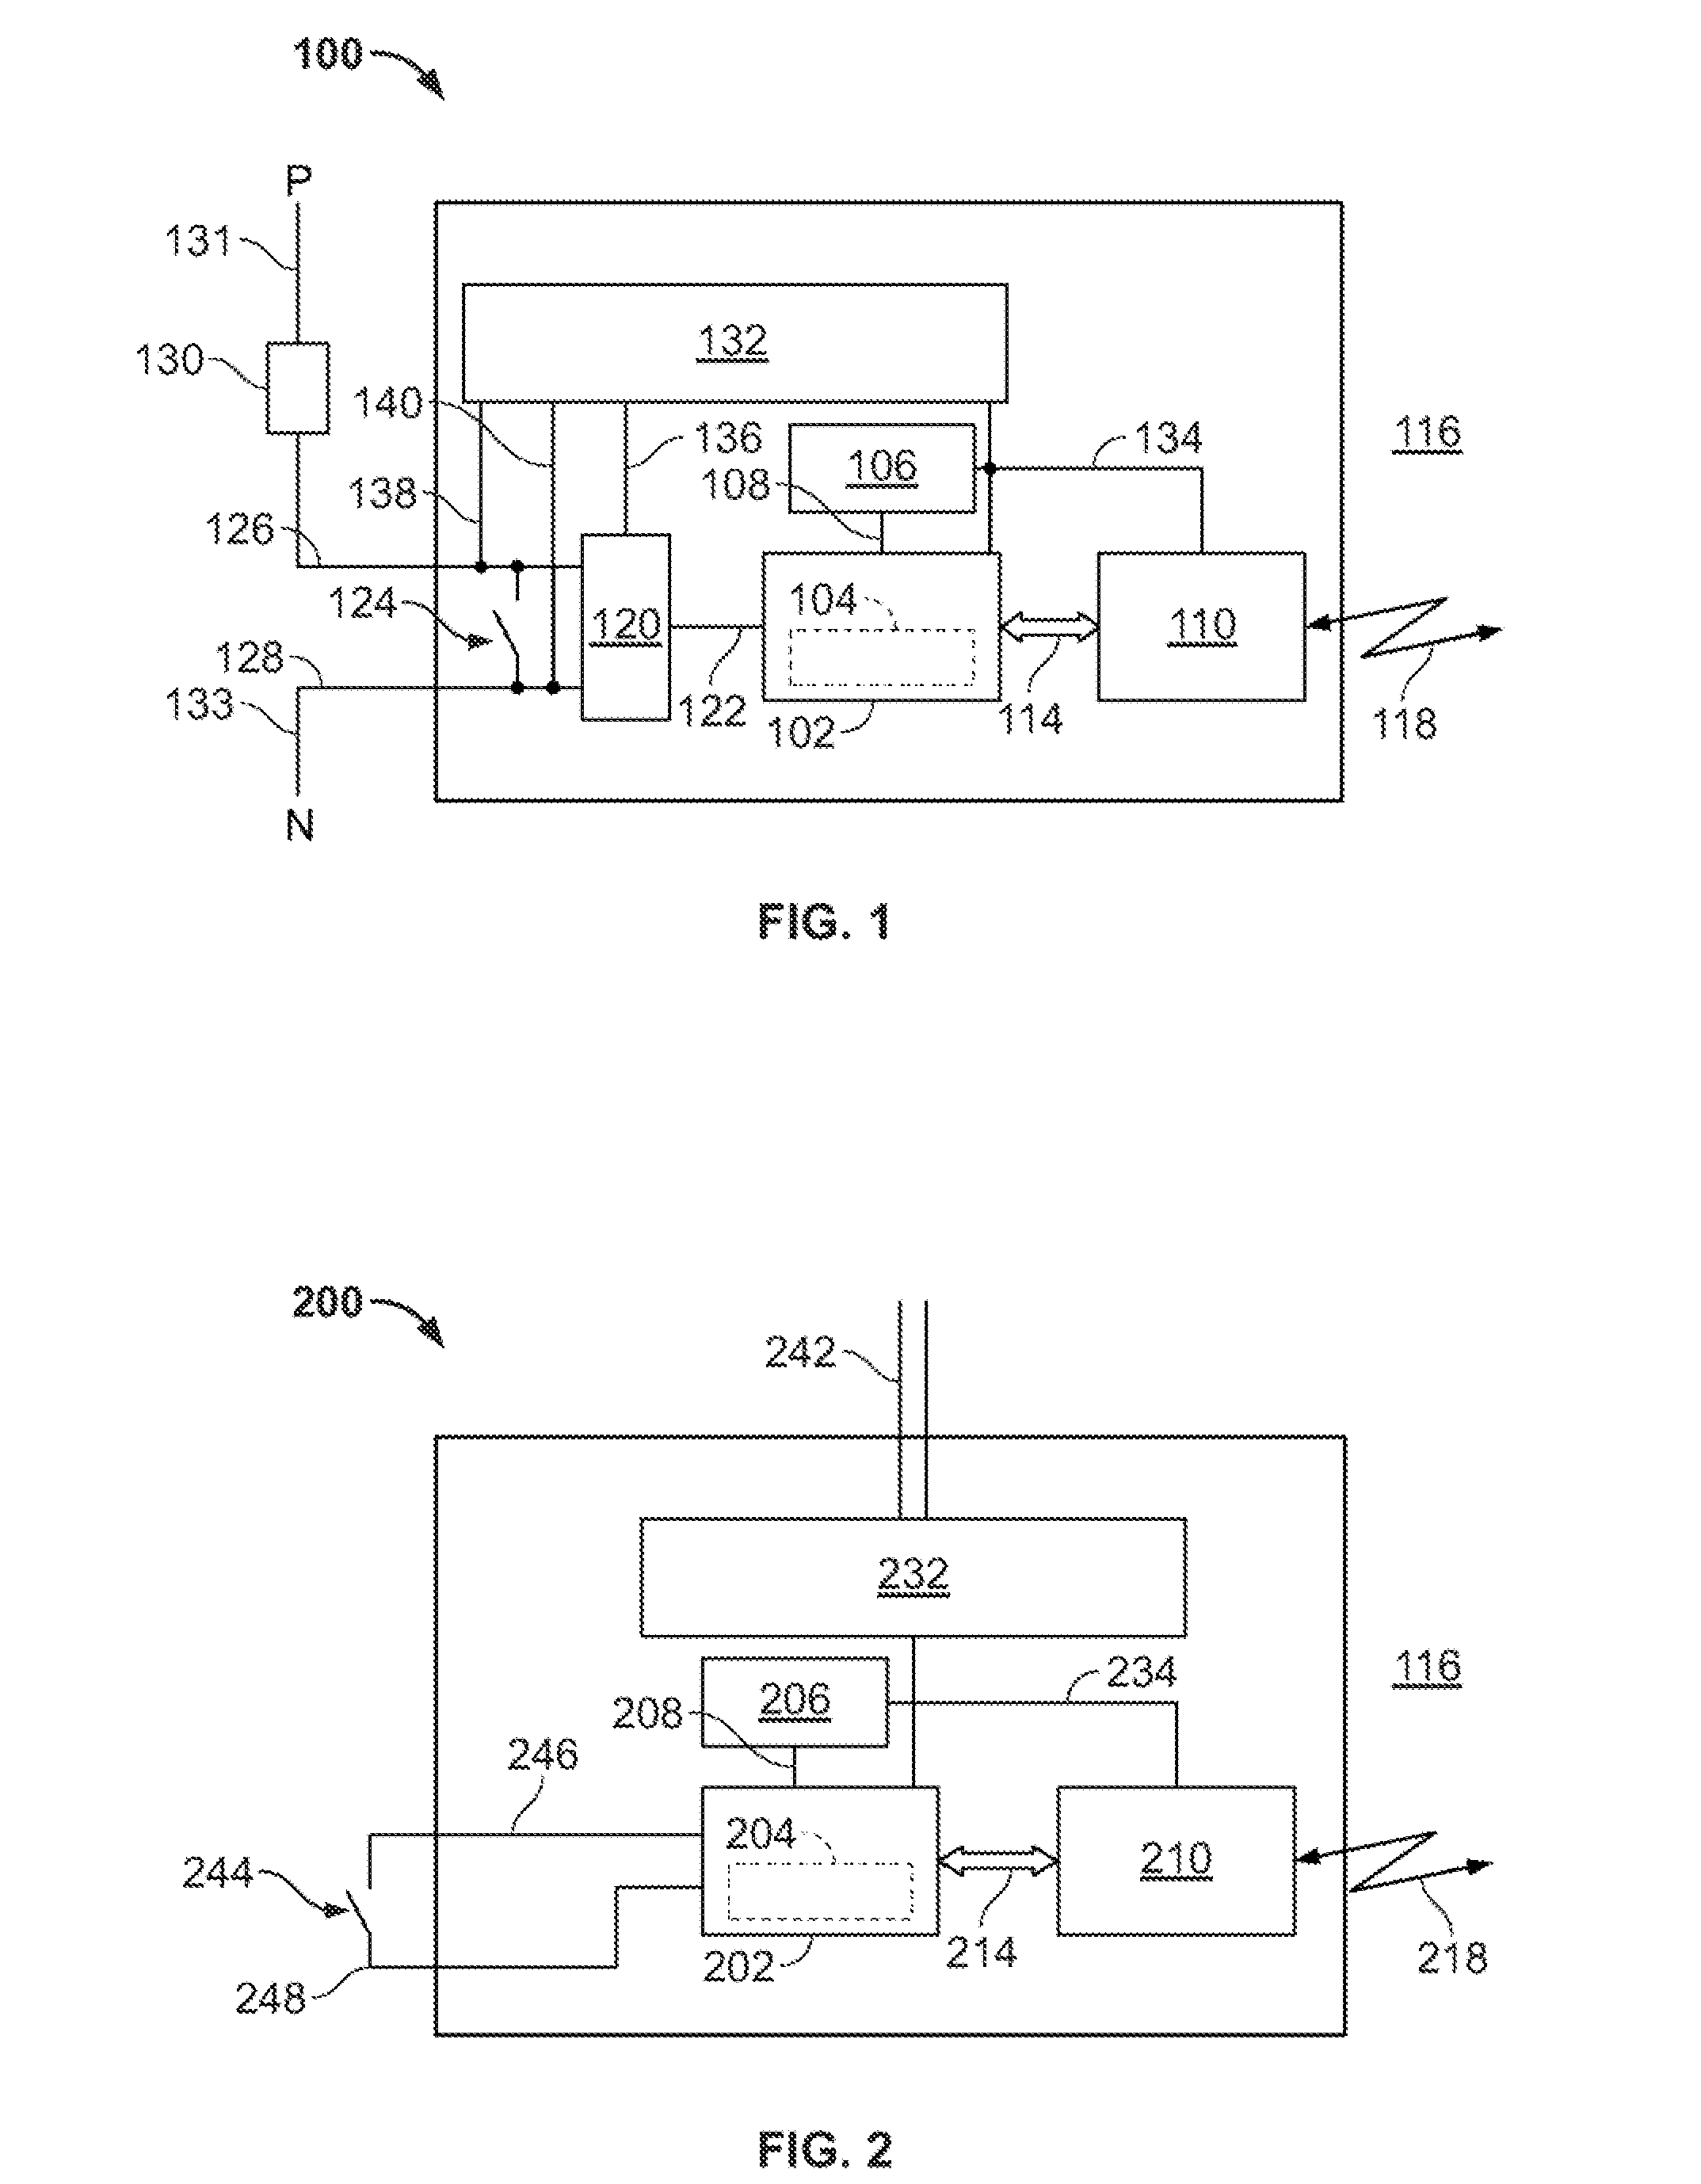 Method and apparatus to facilitate logic control and interface communication